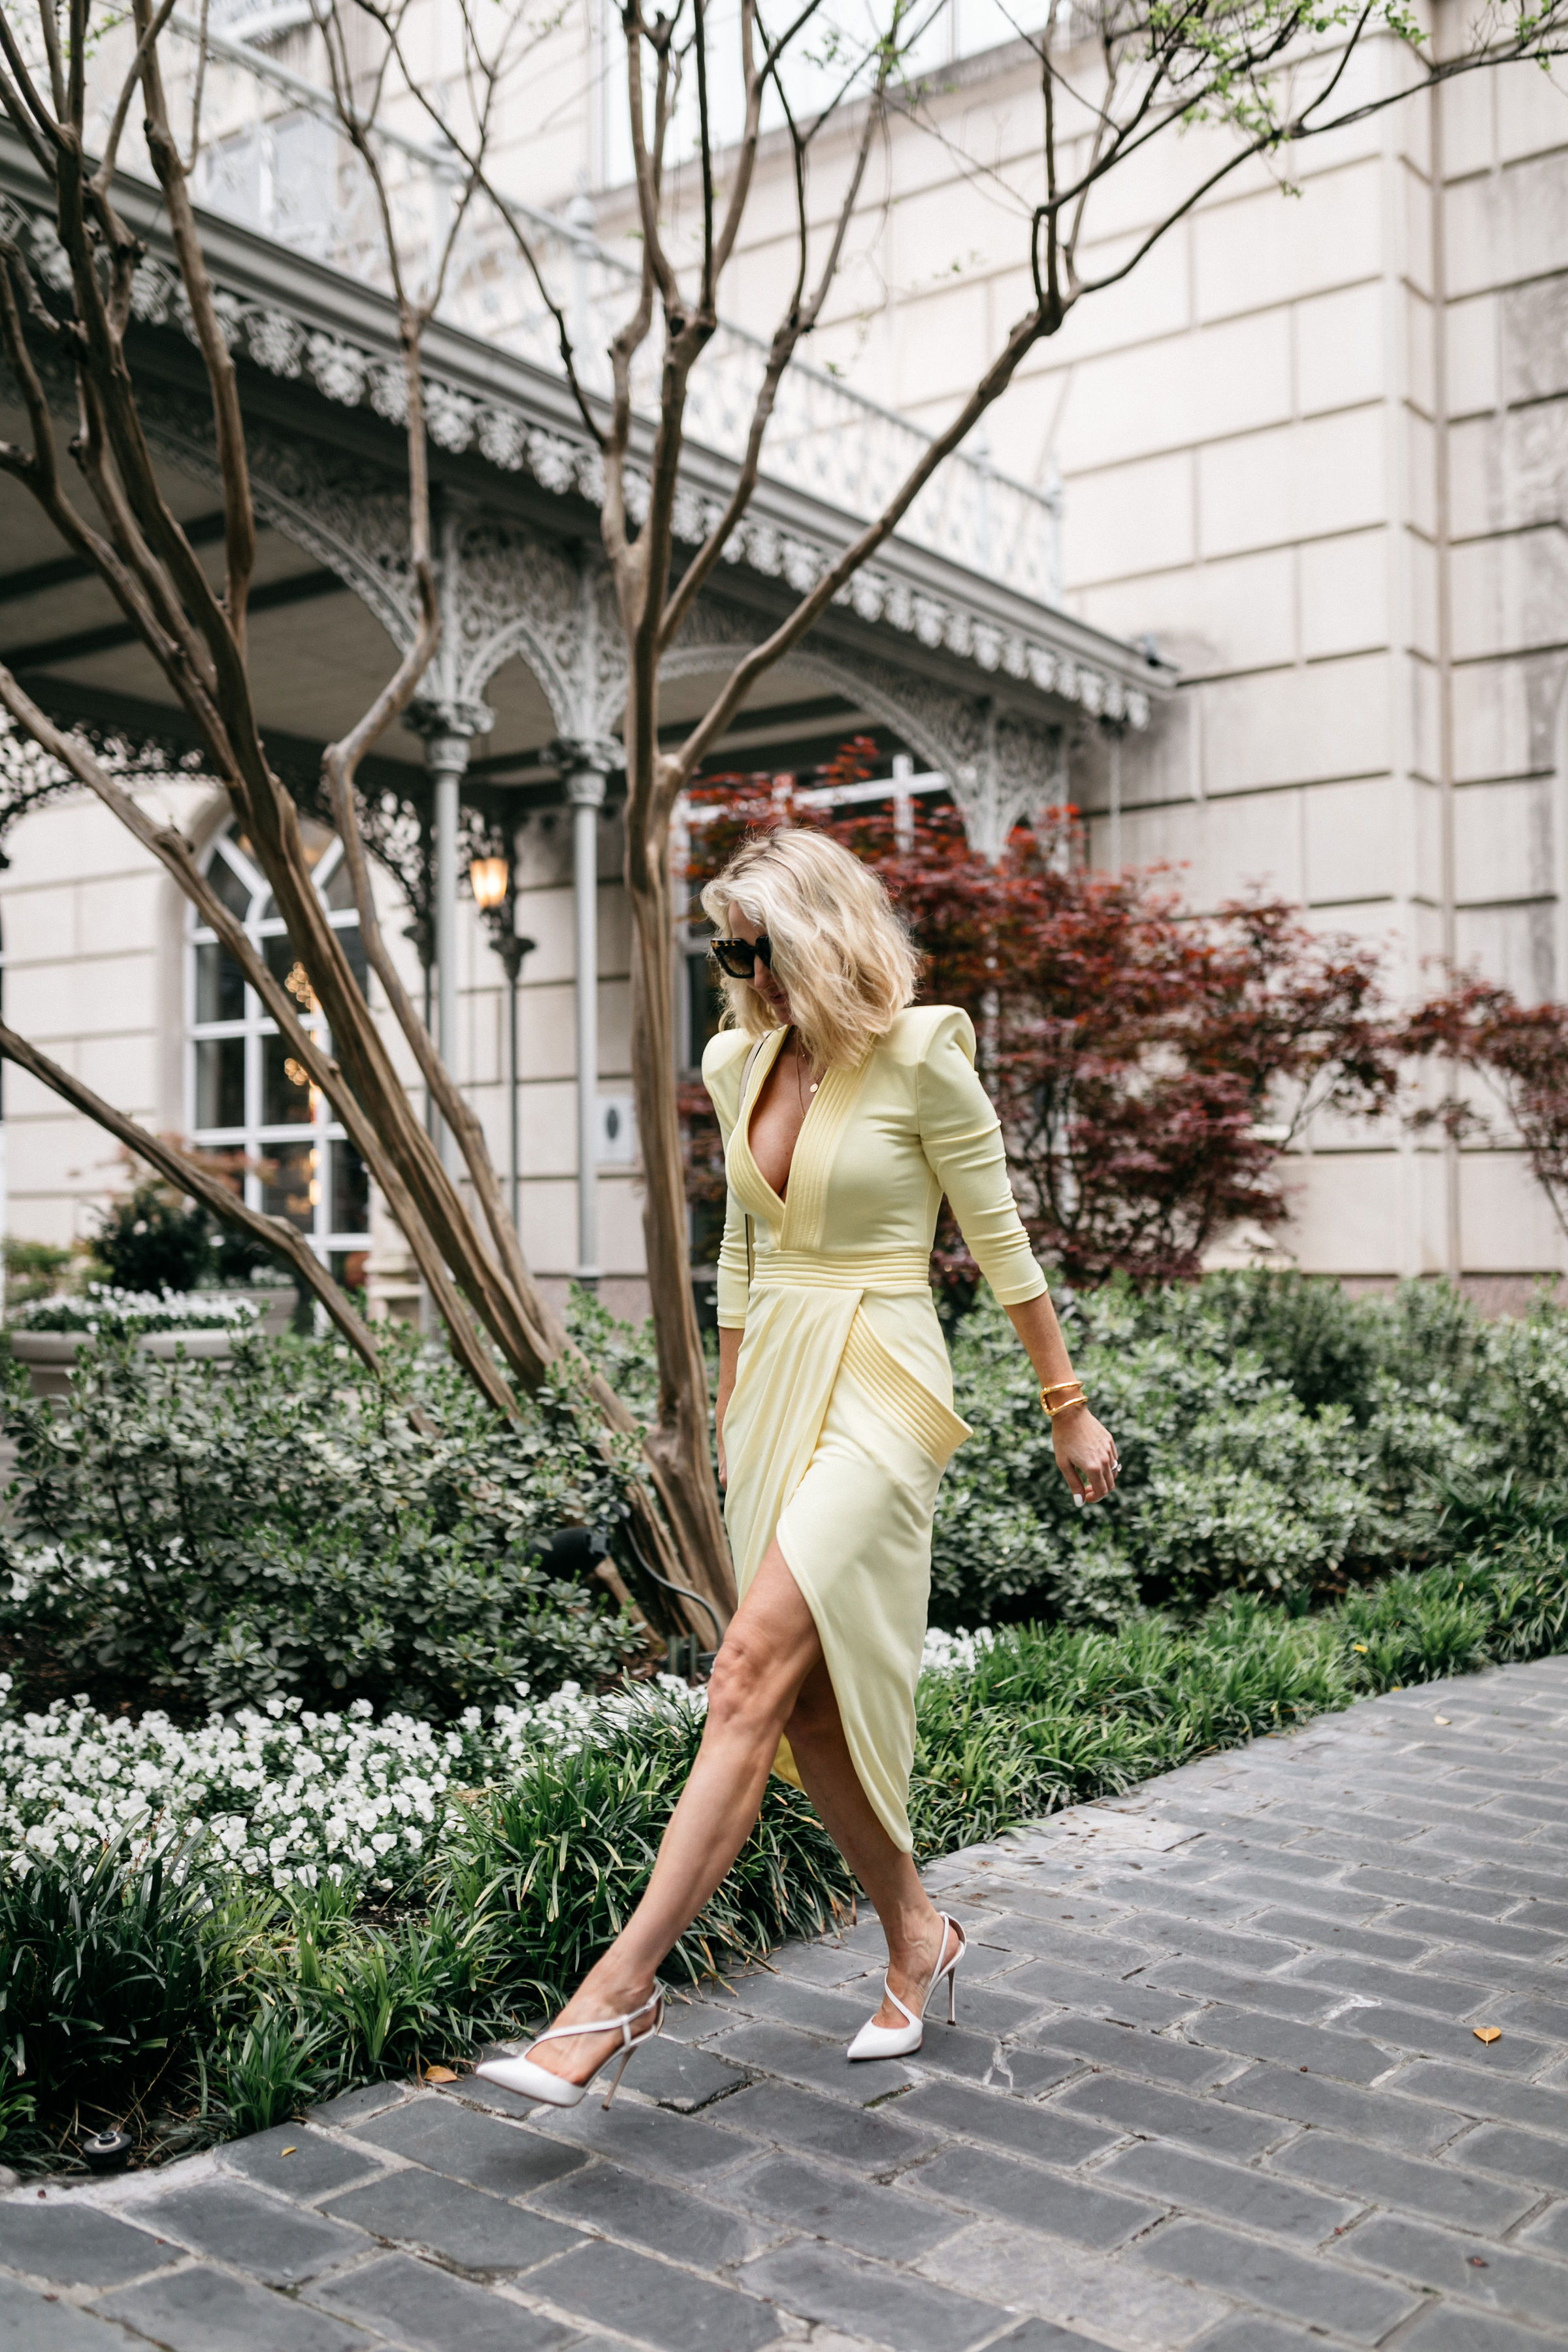 Reward Style Conference 2019, Fashion blogger Erin Busbee of BusbeeStyle.com wearing a yellow Zhivago dress and Sergio Rossi pumps for a cocktail party in Dallas, Texas